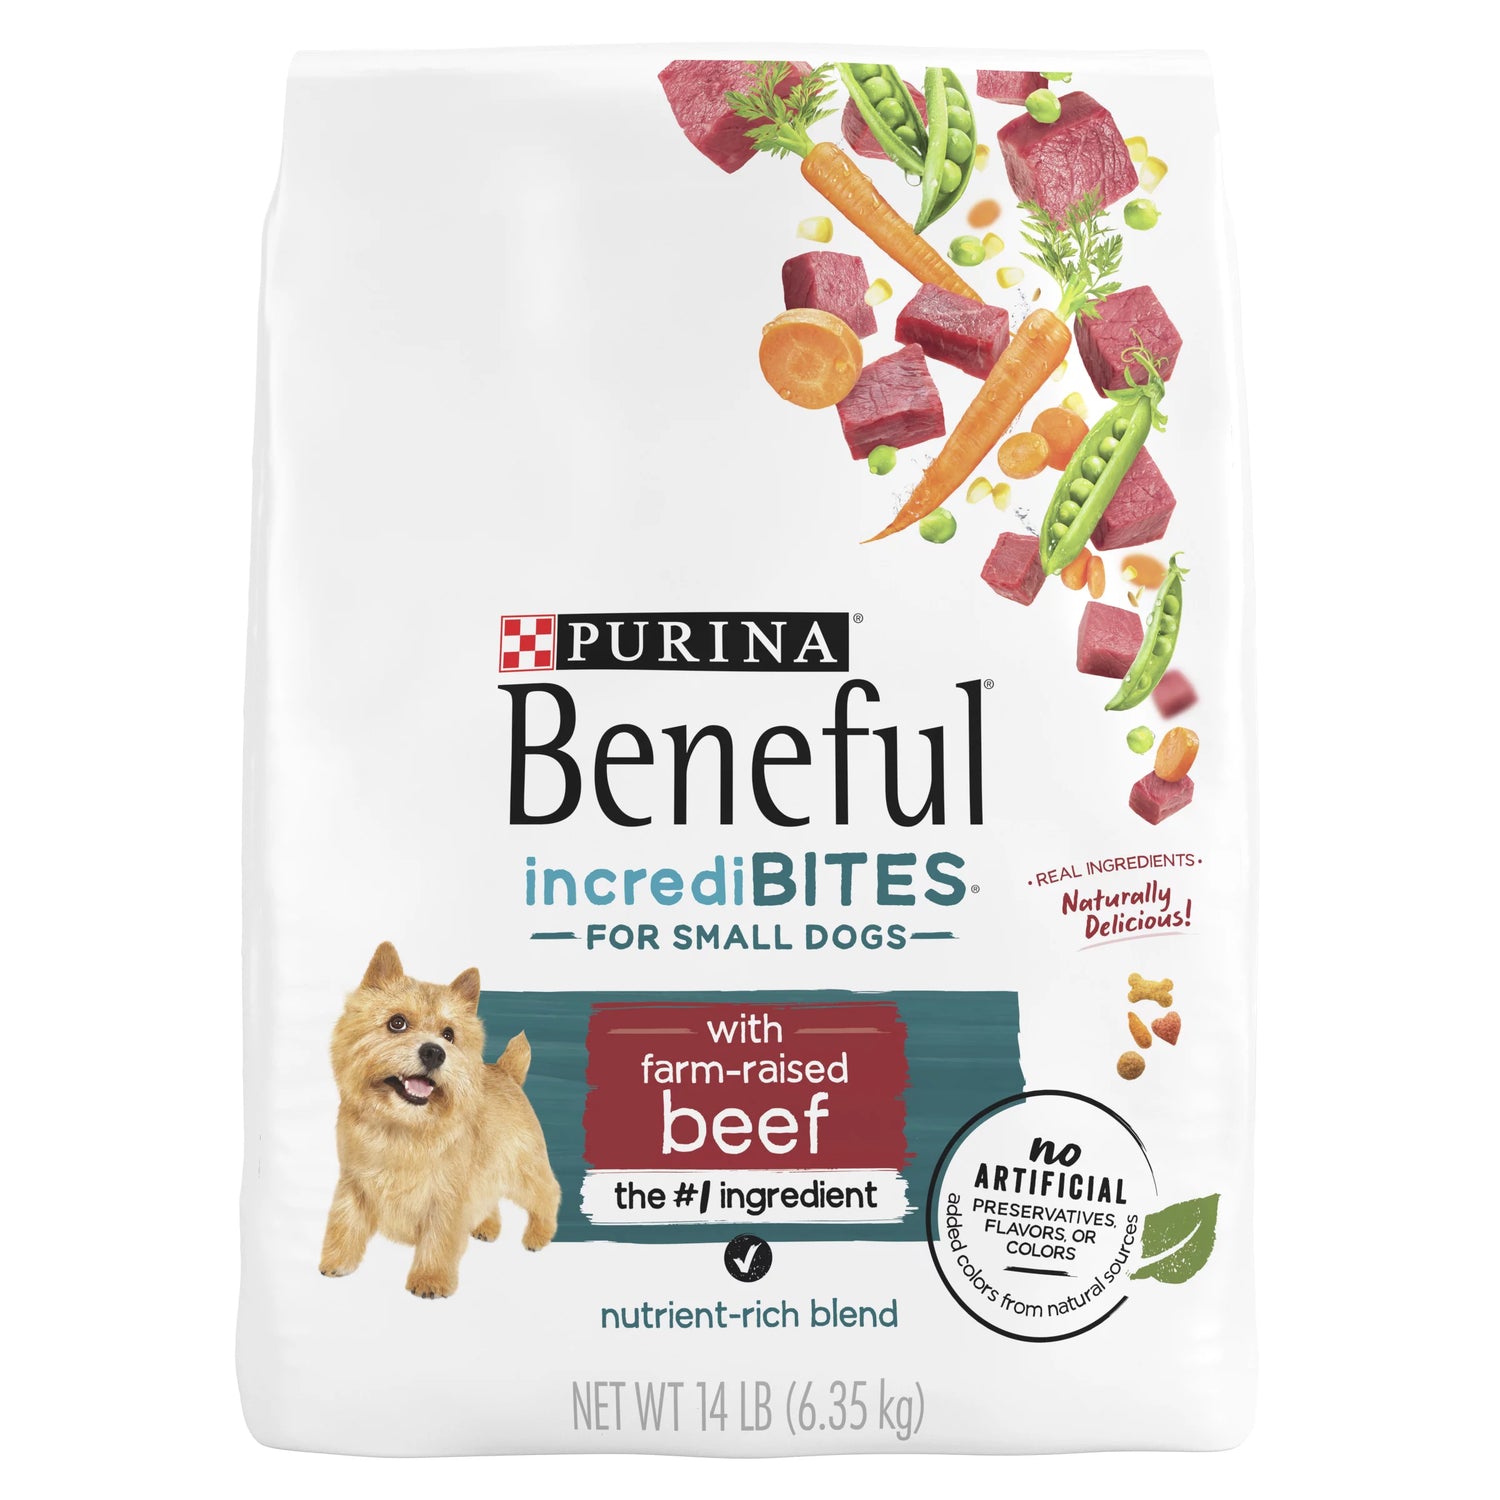 Purina Beneful Incredibites with Farm-Raised Beef, Purina High Protein Dog Food Dry Dog Food for Small Breeds, 14 Lb. Bag